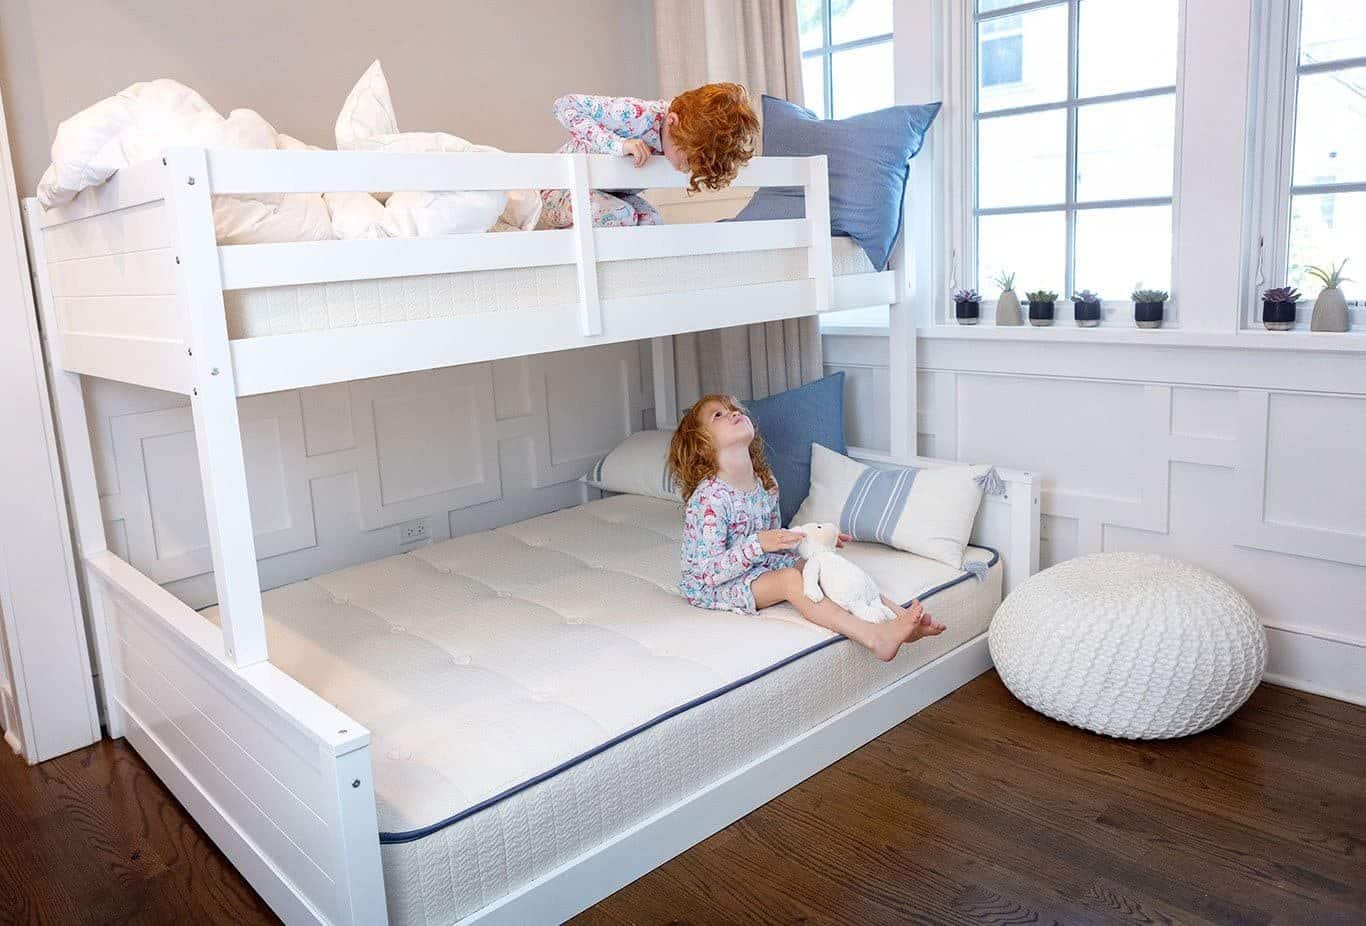 16 CFR 1513 Requirements for Bunk Beds 对双层床的要求